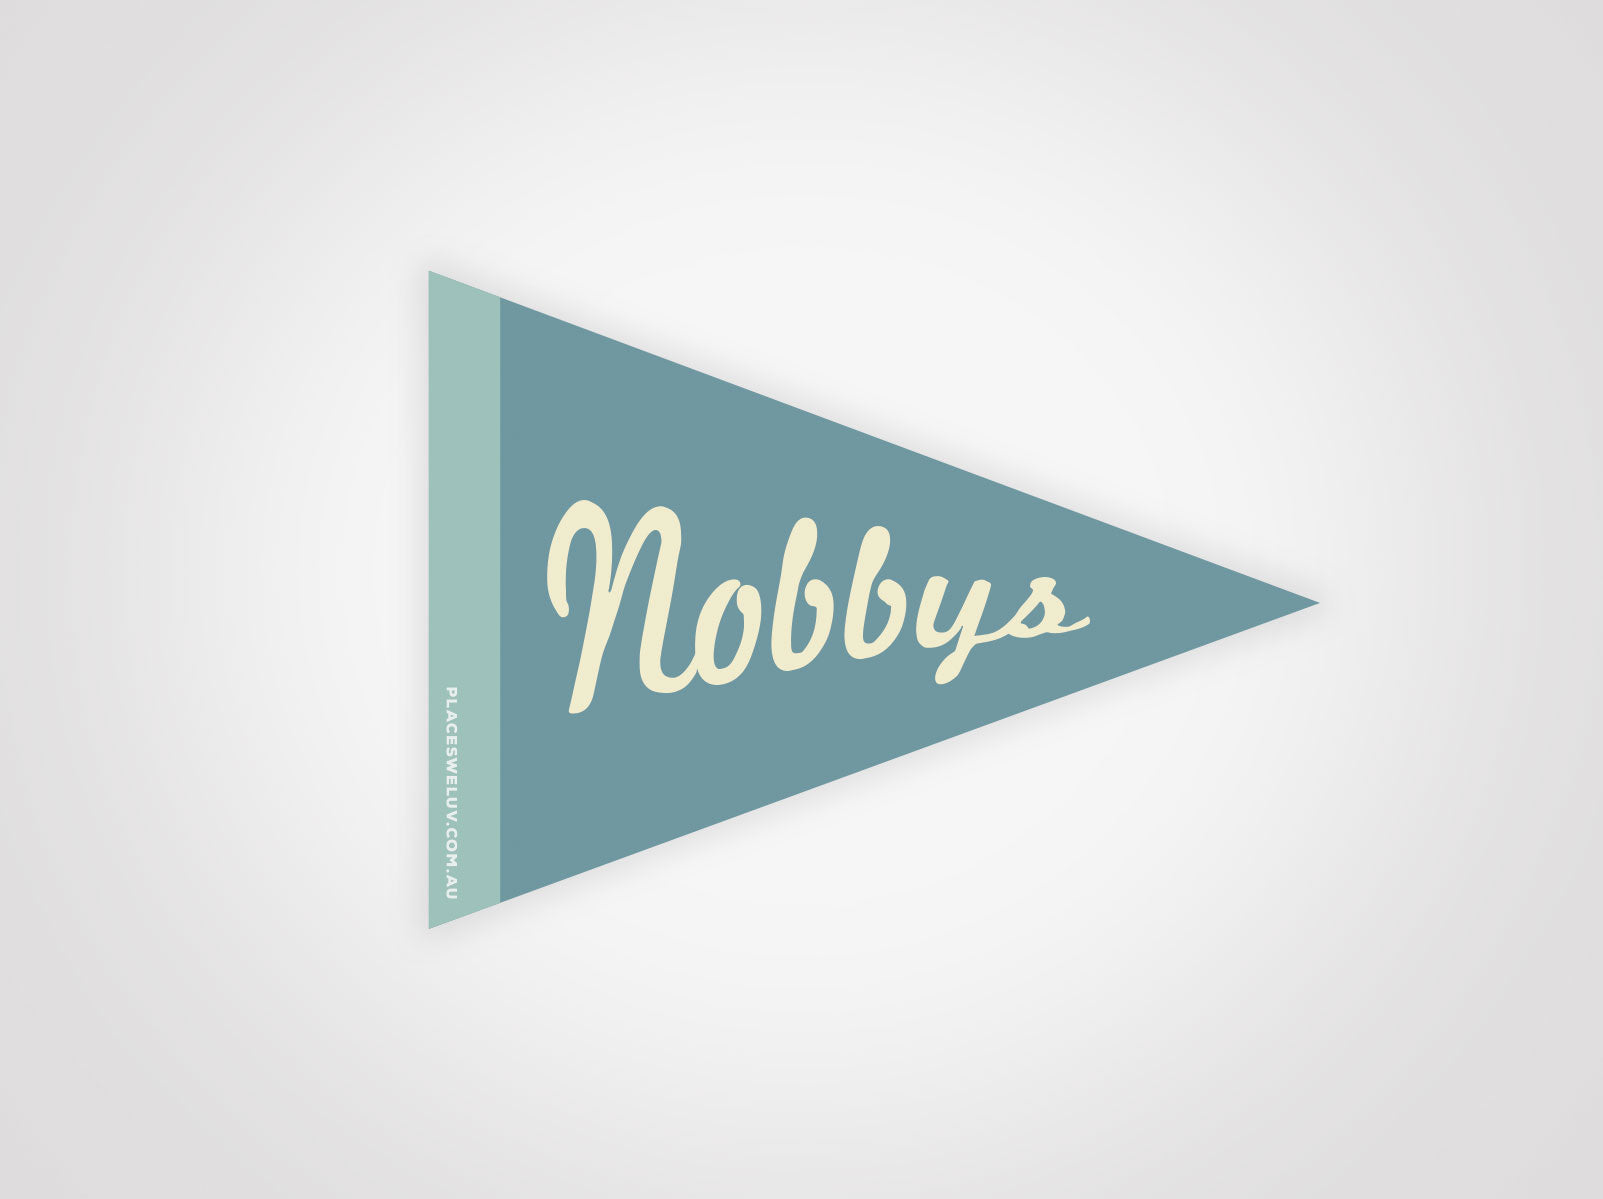 Nobbys beach vintage style travel decal by Places we luv